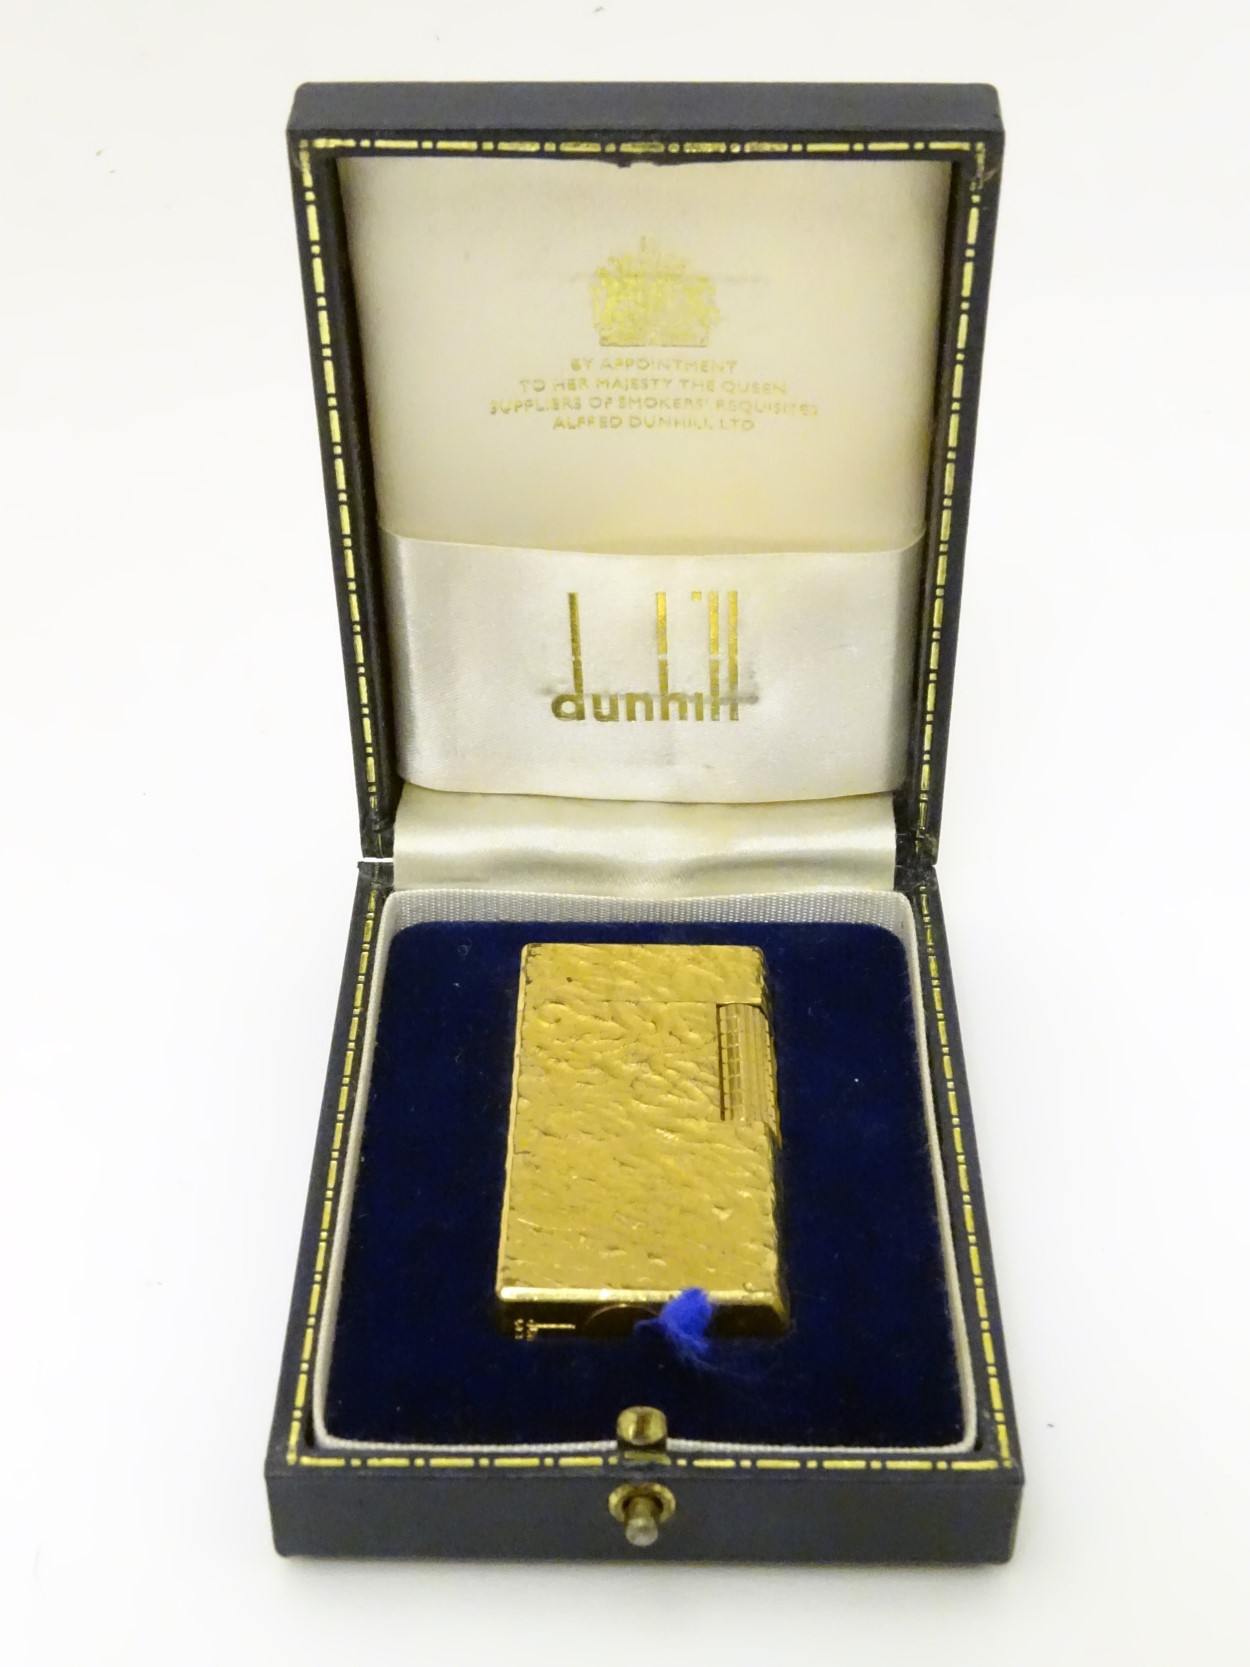 Dunhill: A cased, collectable gold-plated lighter with textured finish.